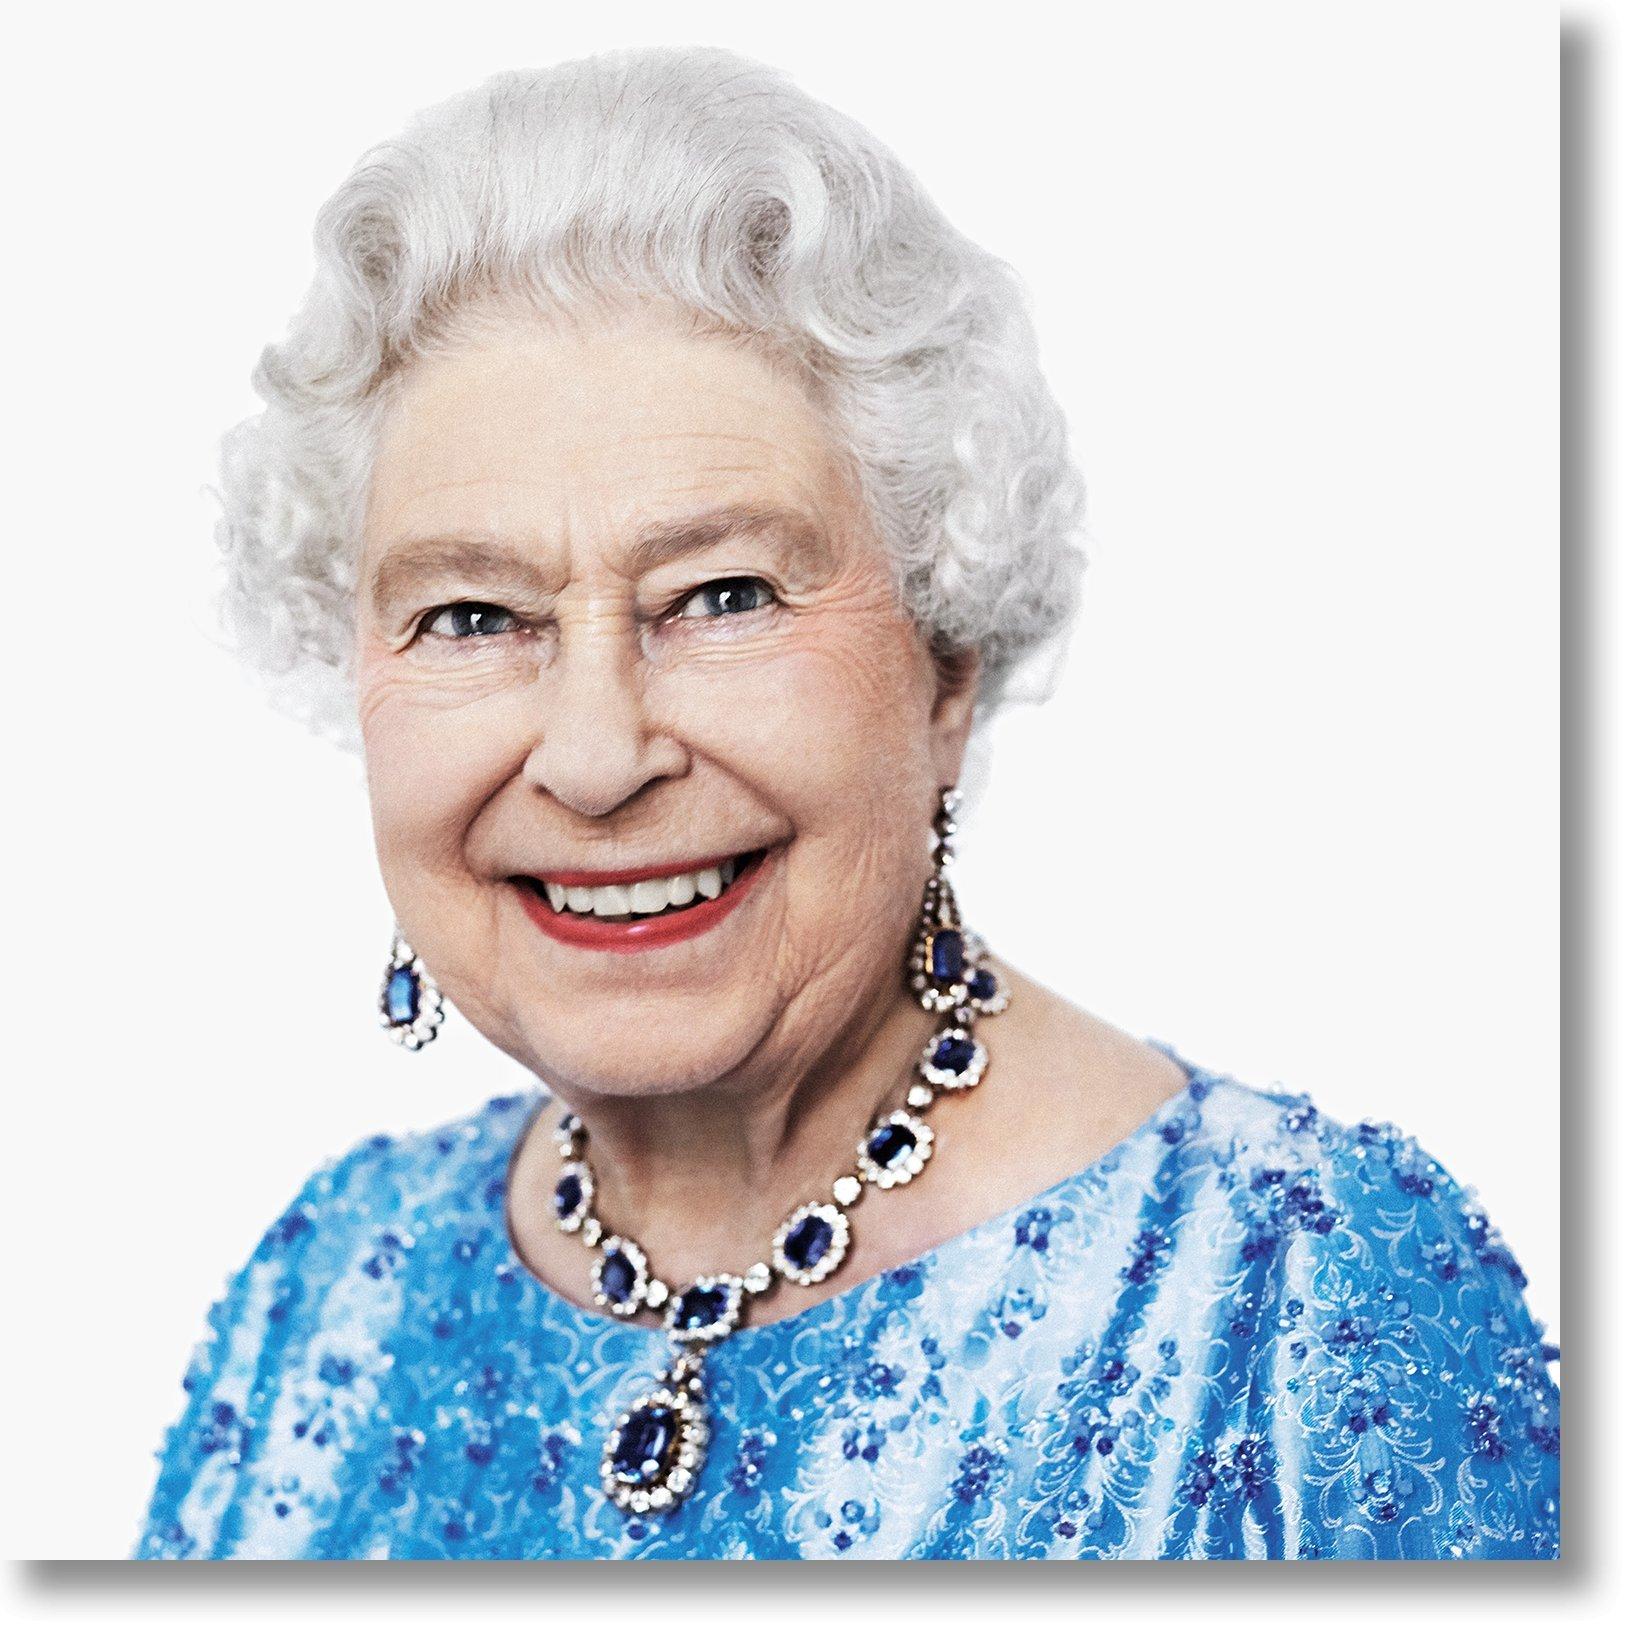 David Bailey Portrait Photograph - Her Majesty The Queen. Dye sublimation print on Aluminum. Color Photography